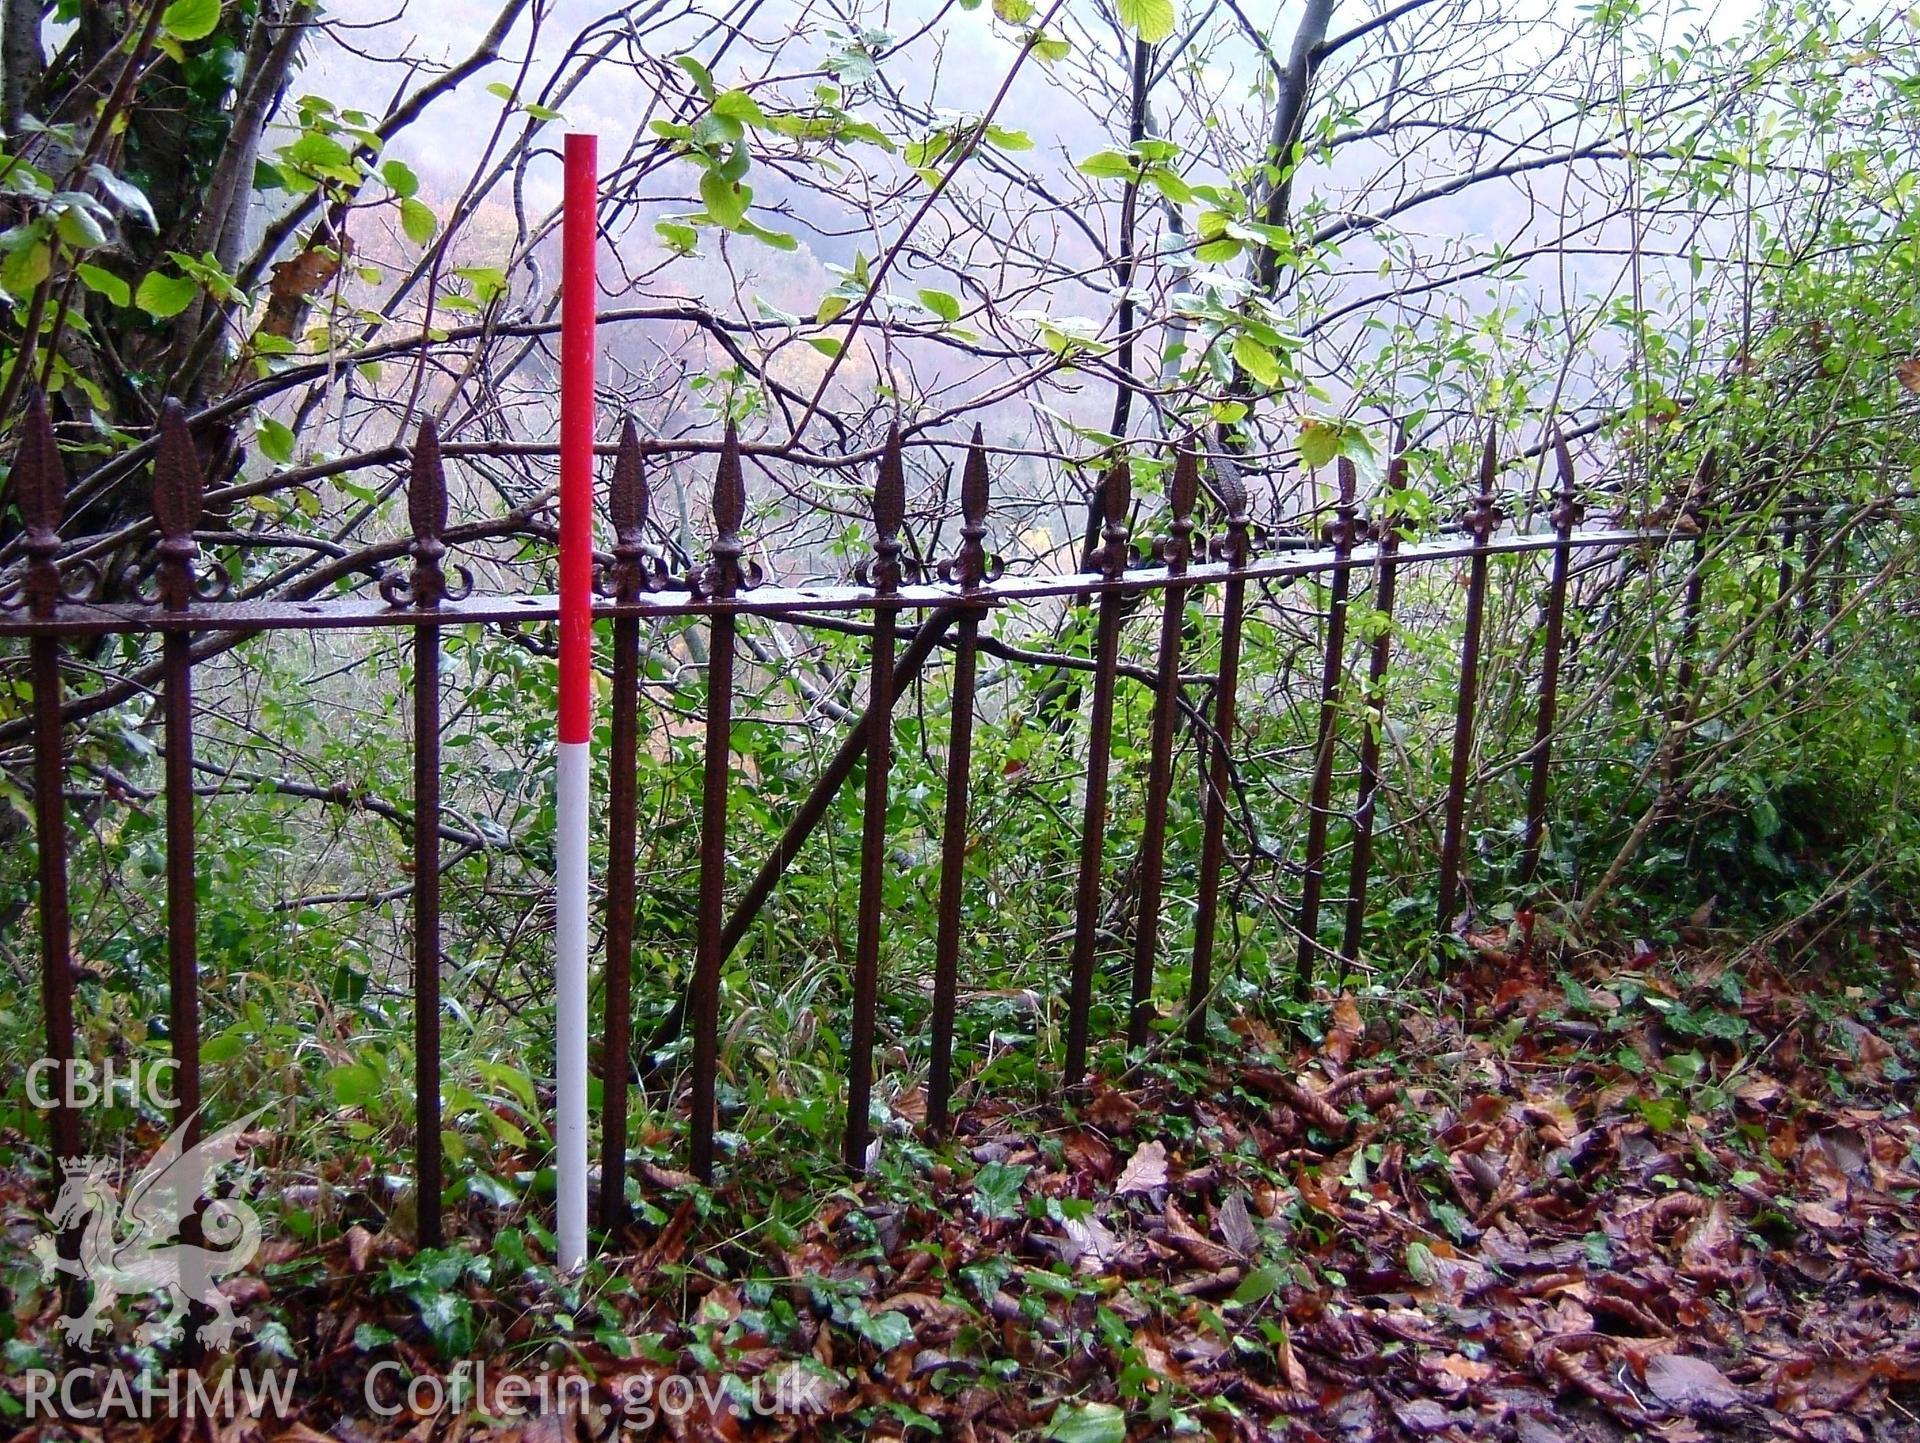 Digital colour photograph taken as part of an archaeological survey at the Piercefield walks, 2004. The photograph shows part of a fence at the Piercefield Estate.